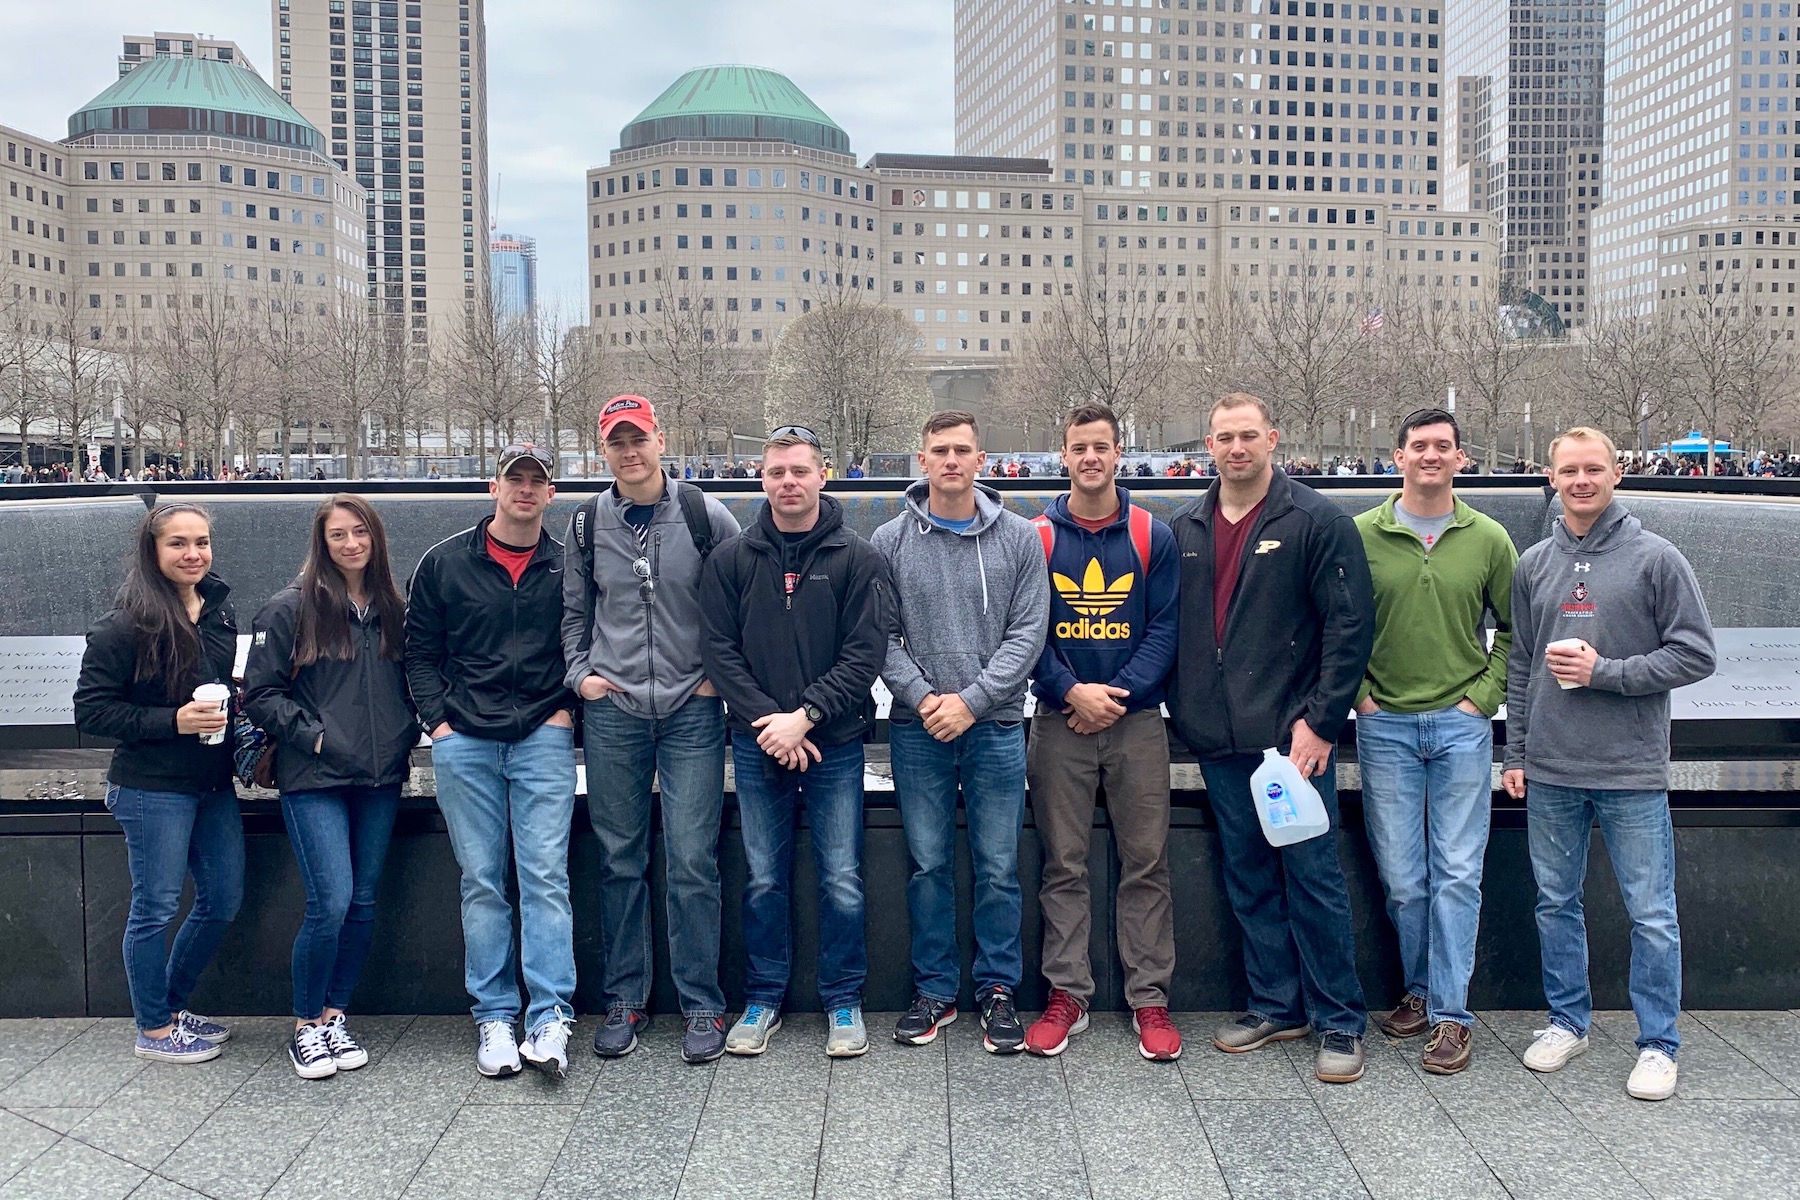 The Austin Peay ROTC Ranger Challenge team cadets competing at the Sandhurst competition visited the 9/11 Memorial in New York City on Thursday.